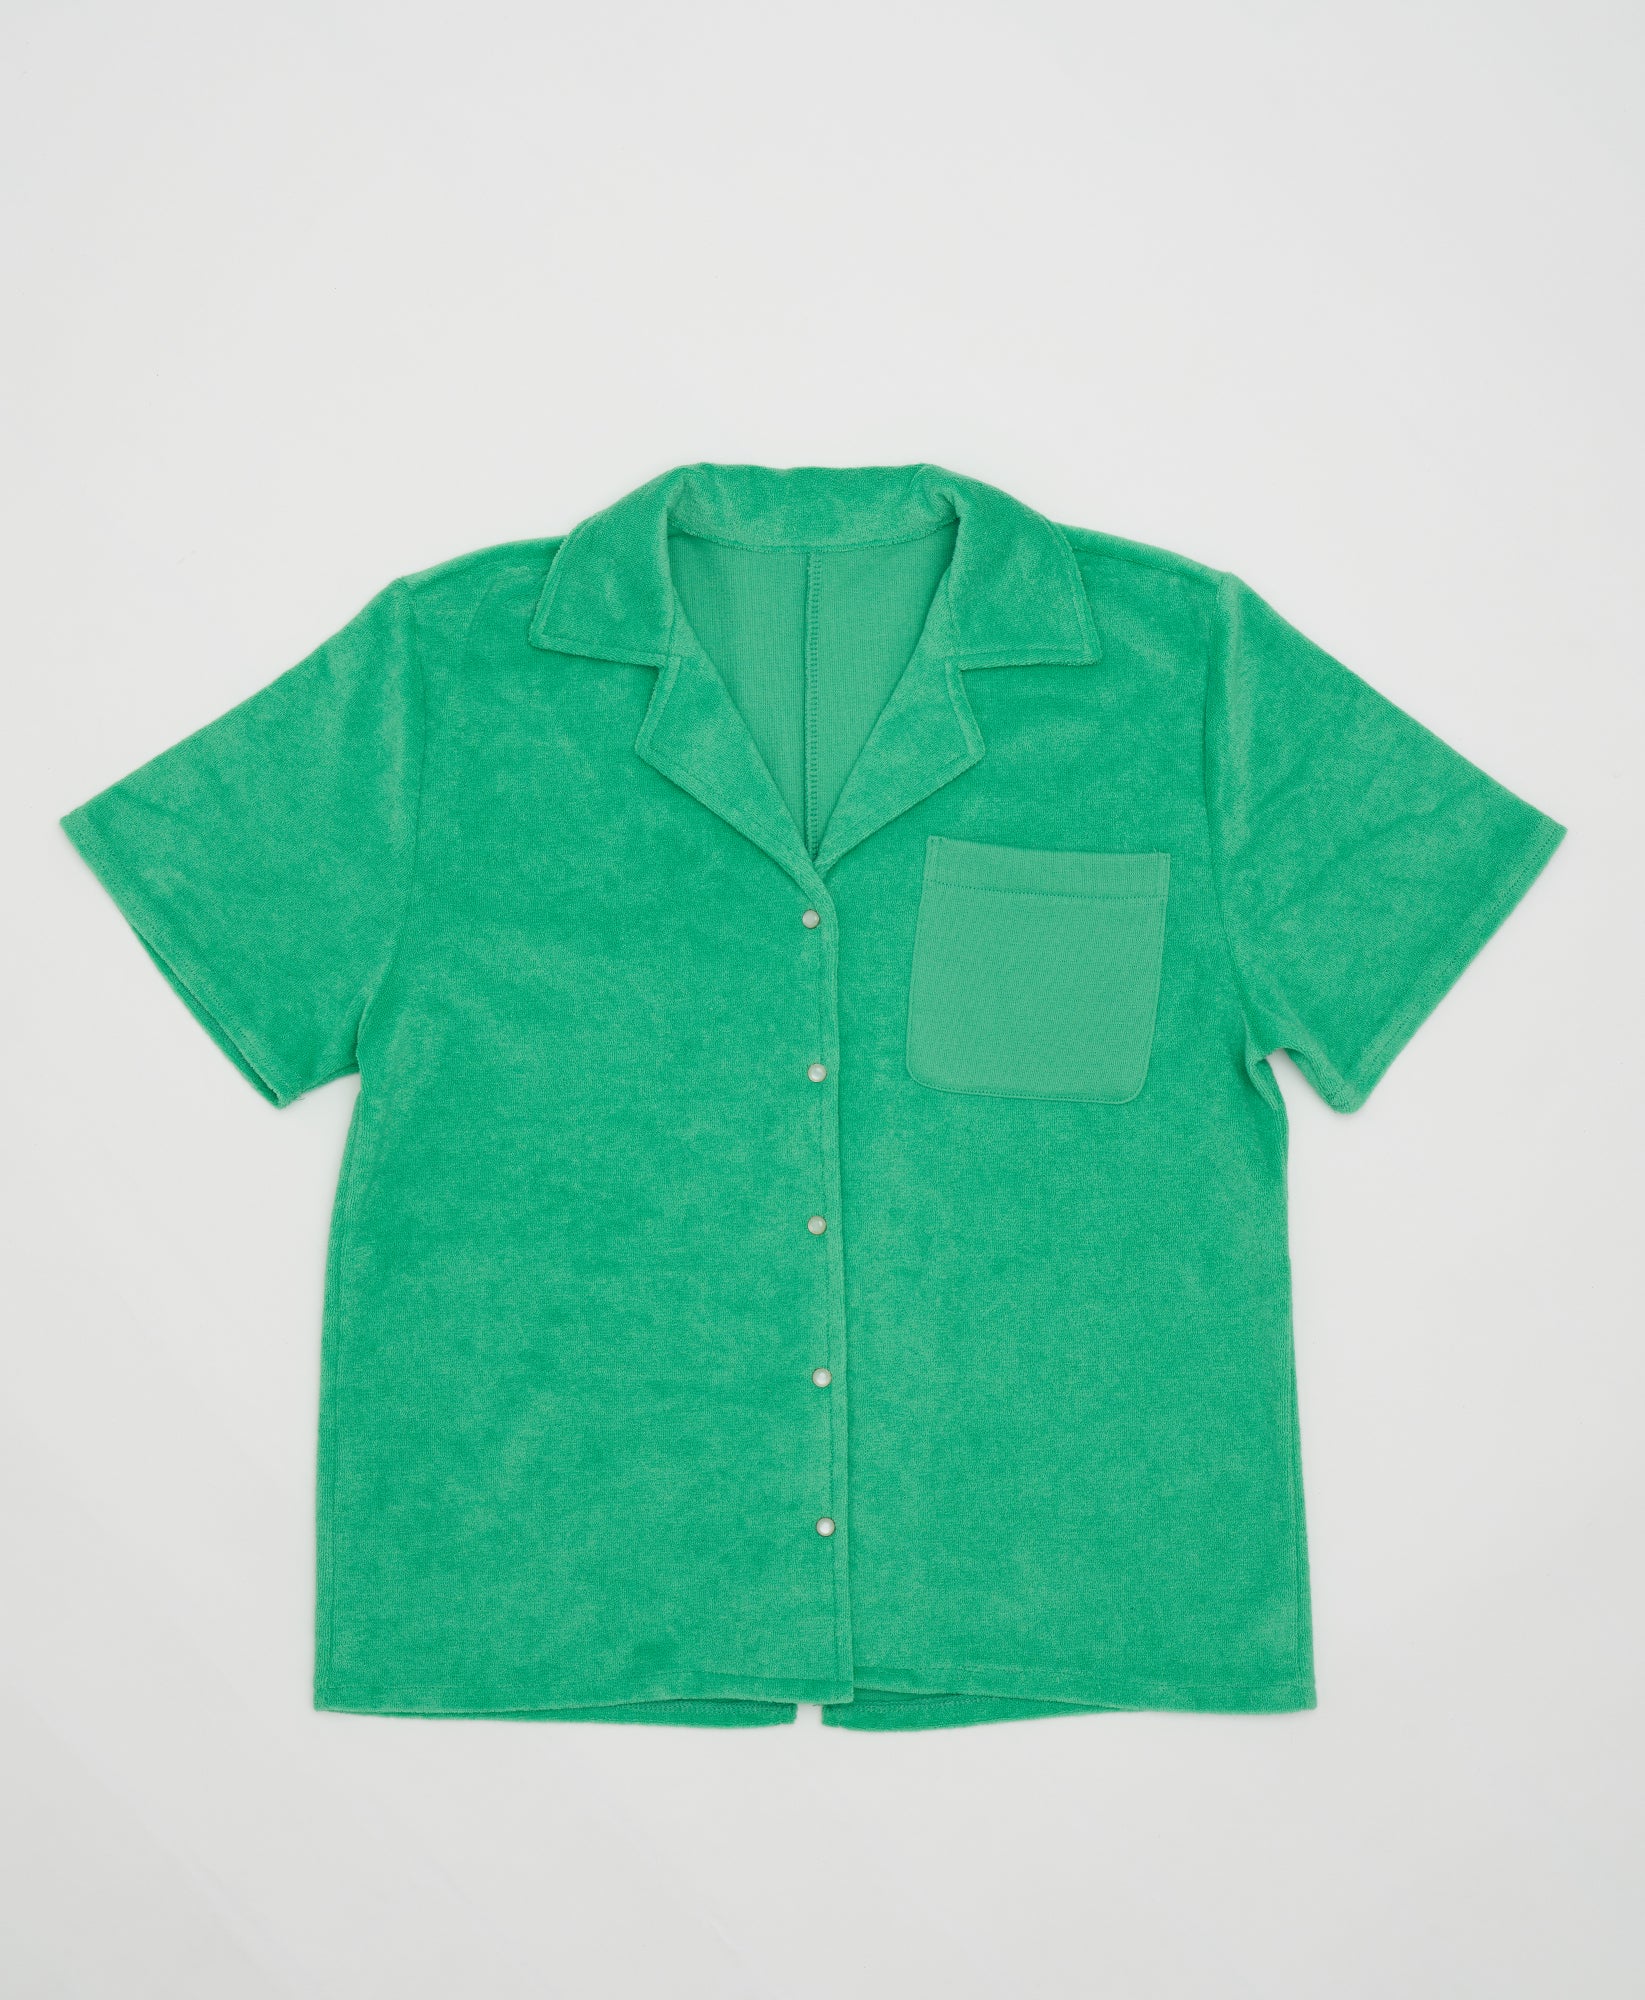 Wear One's At Aqualina Terry Cloth Button Down in Webster Green Flat Front